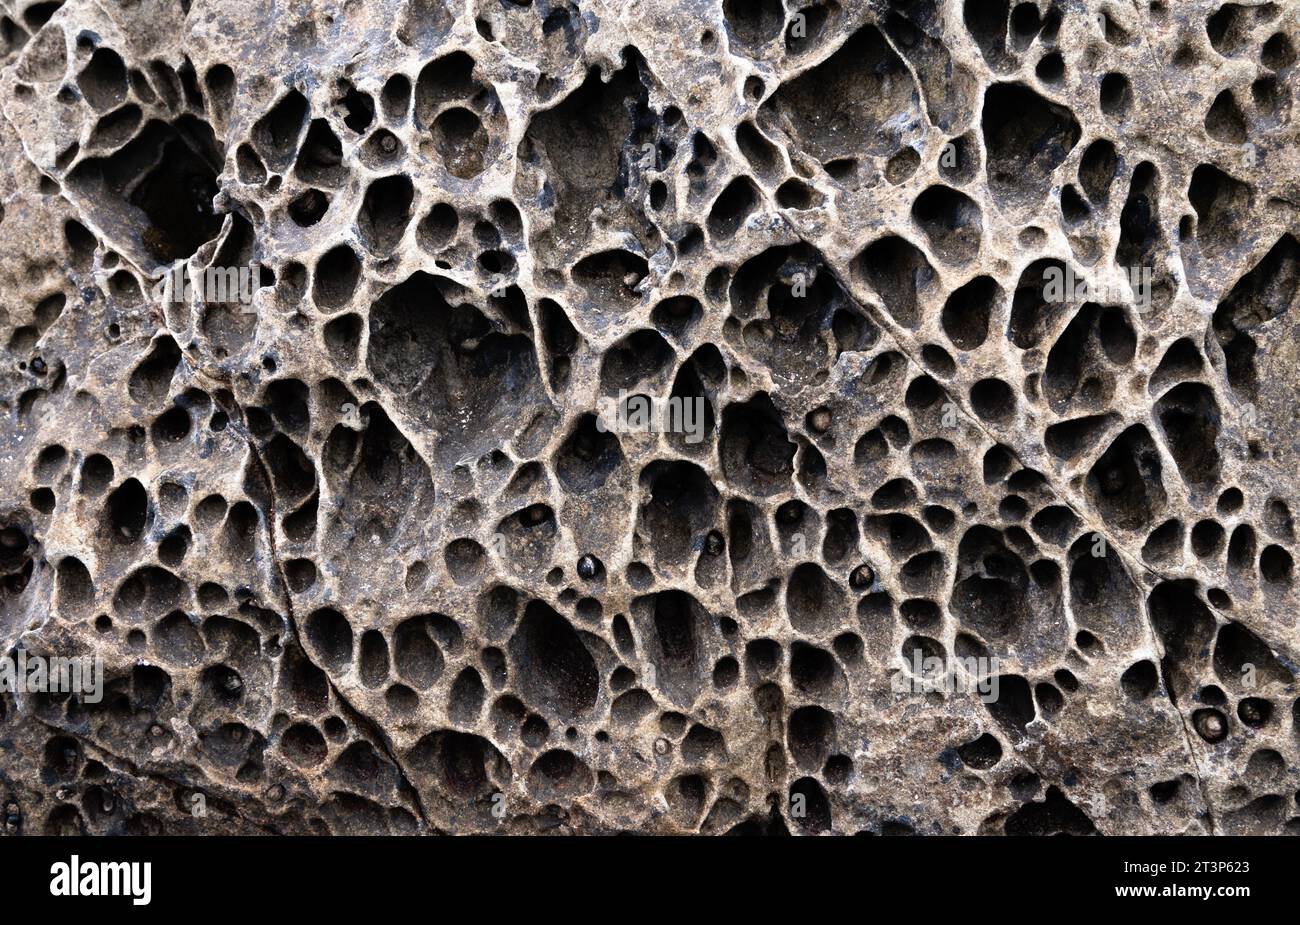 Textured gray rock structure with holes Stock Photo